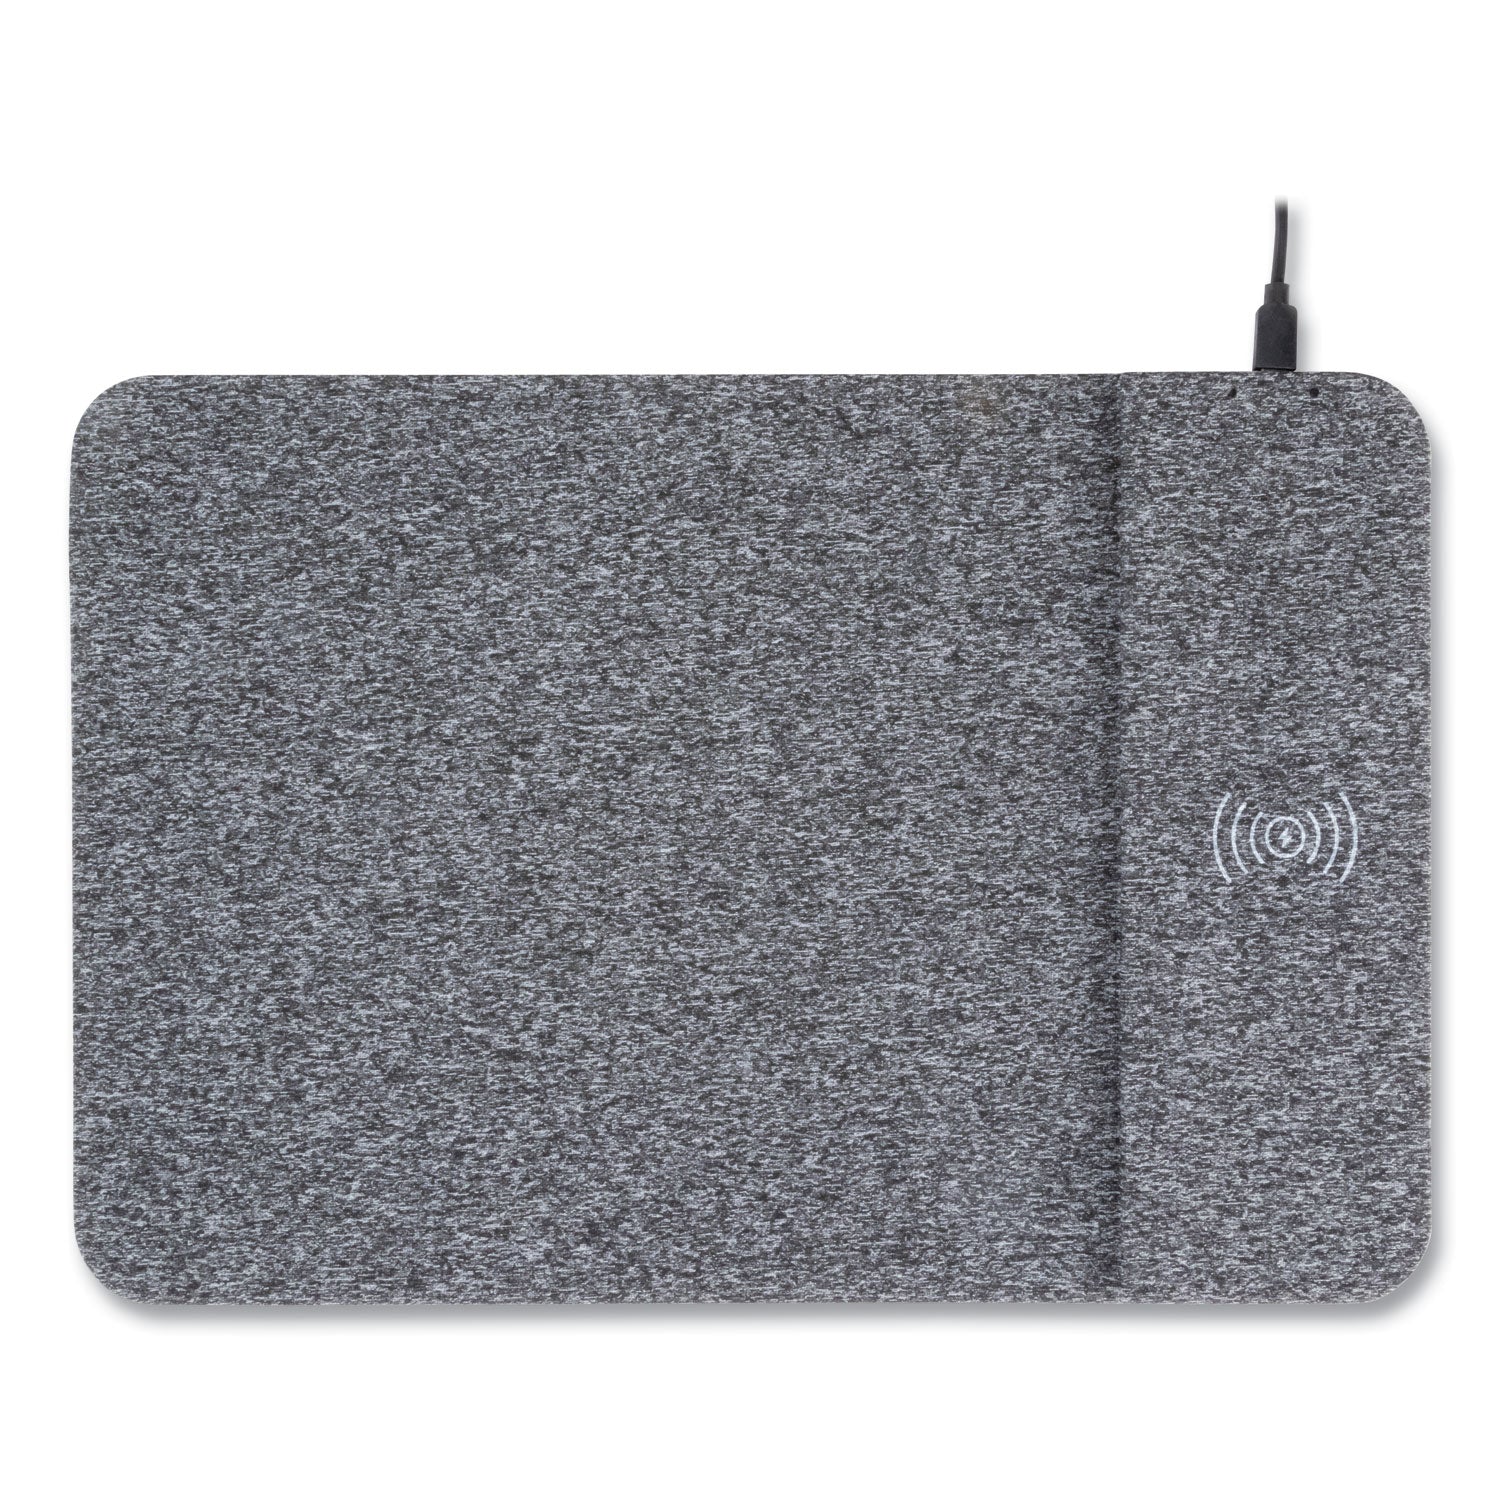 powertrack-wireless-charging-mouse-pad-13-x-875-gray_asp32192 - 4